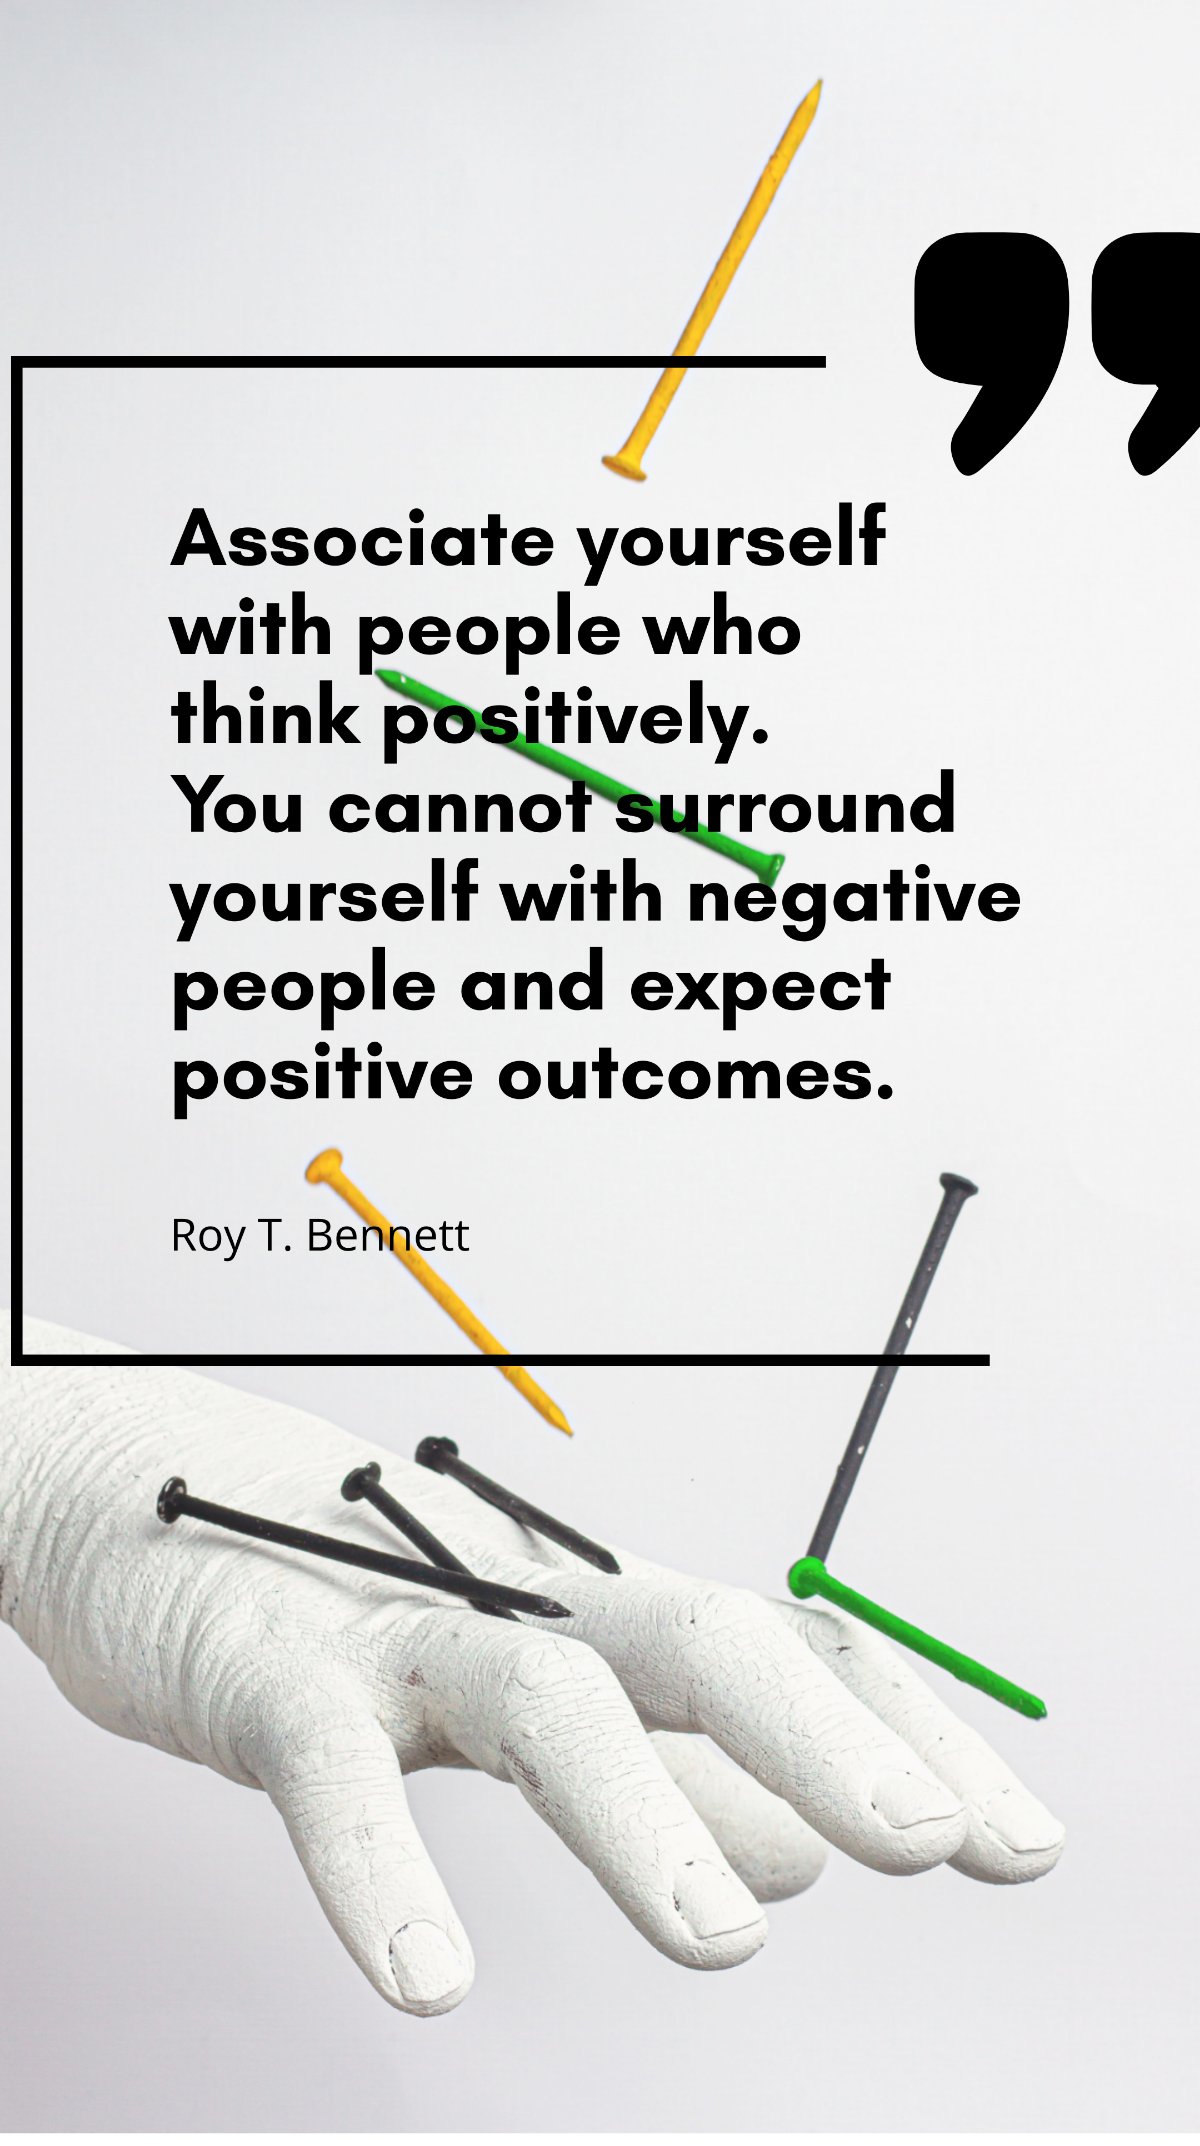 Roy T. Bennett - Associate yourself with people who think positively. You cannot surround yourself with negative people and expect positive outcomes. Template